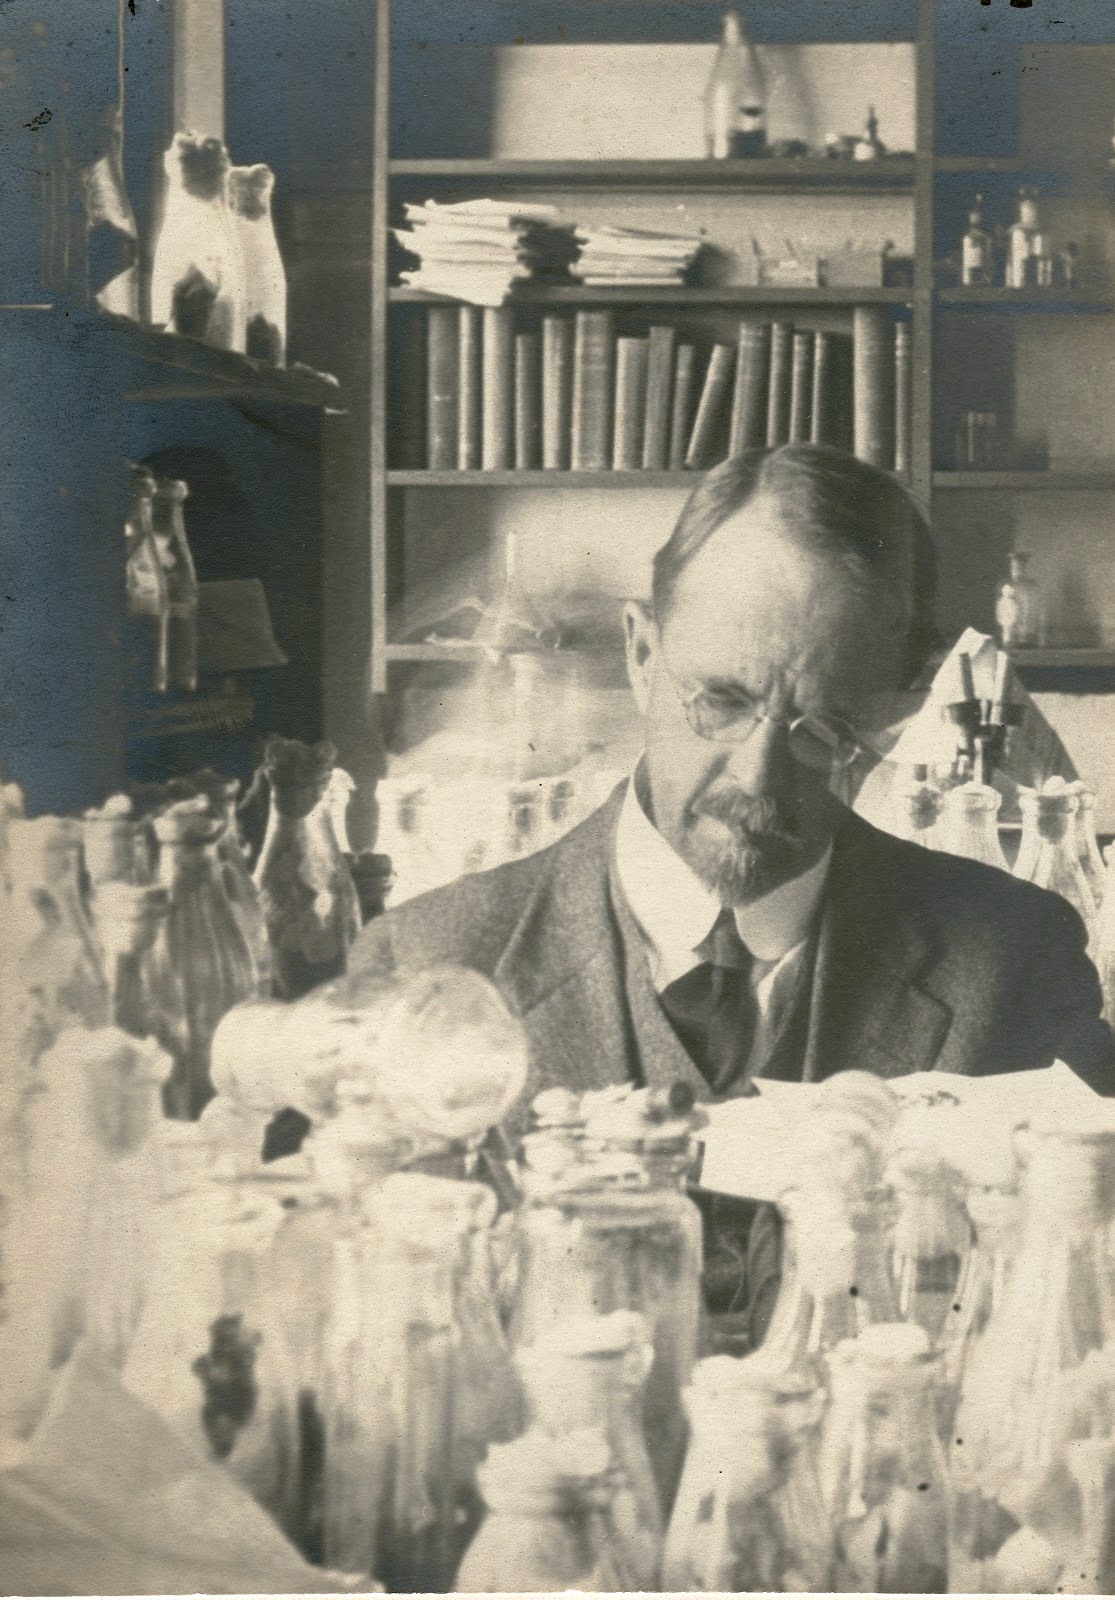 Morgan achieved international fame as an experimental zoologist before he devoted his full attention to heredity, the field in which he won his greatest recognition. Morgan discovered the basic mechanisms of heredity and was a pioneering geneticist, winning the Nobel Prize in Physiology or Medicine in 1933. Photo courtesy of UK Special Collections. 